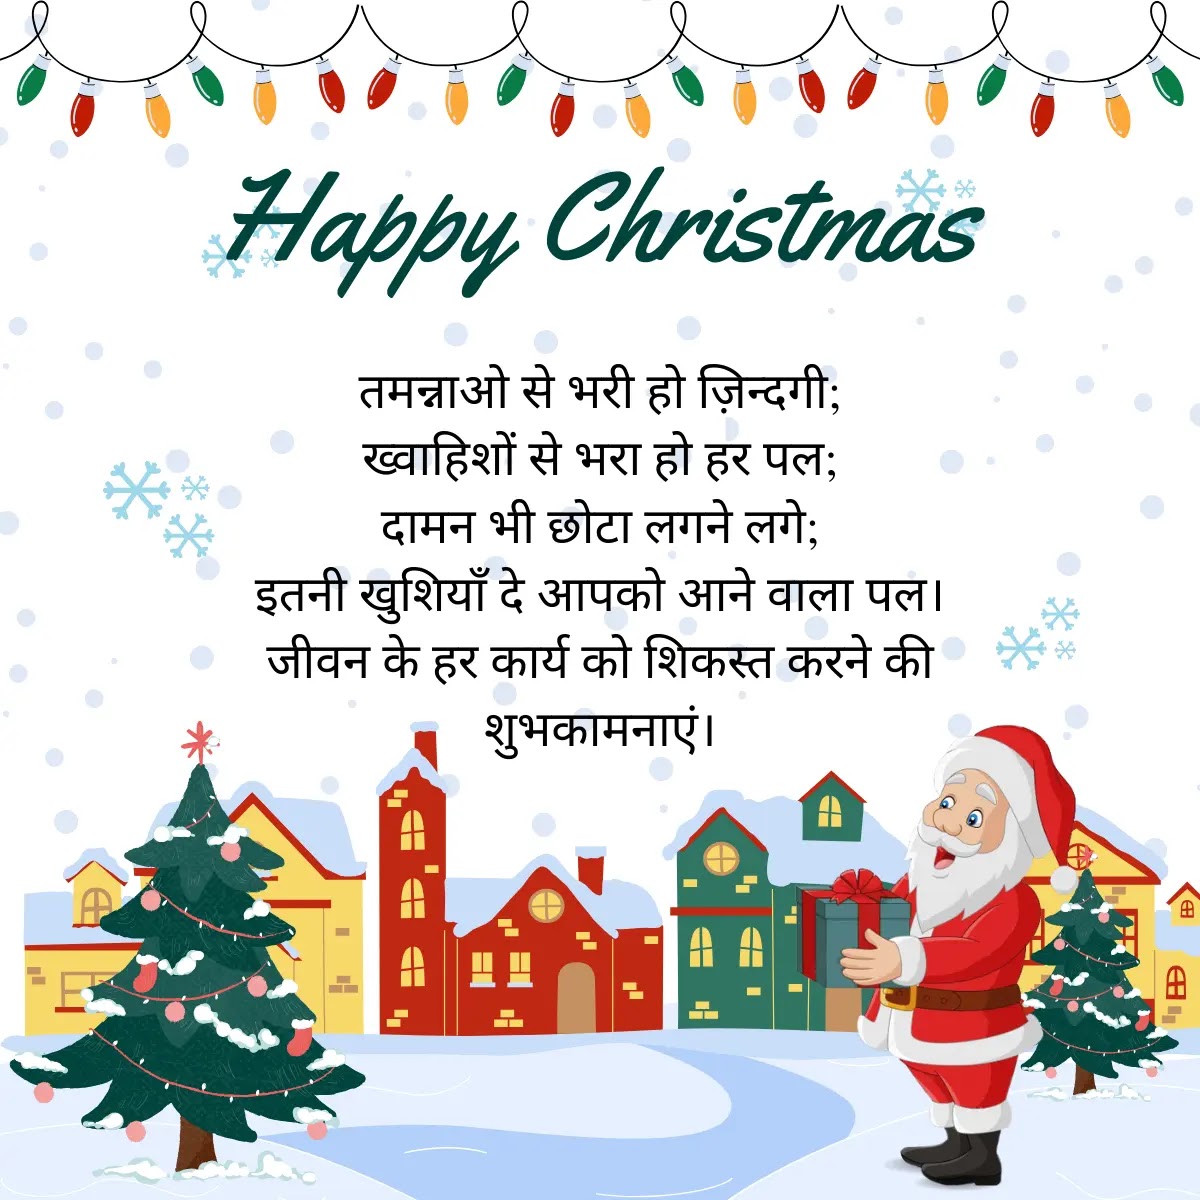 Merry Christmas Messages in Hindi